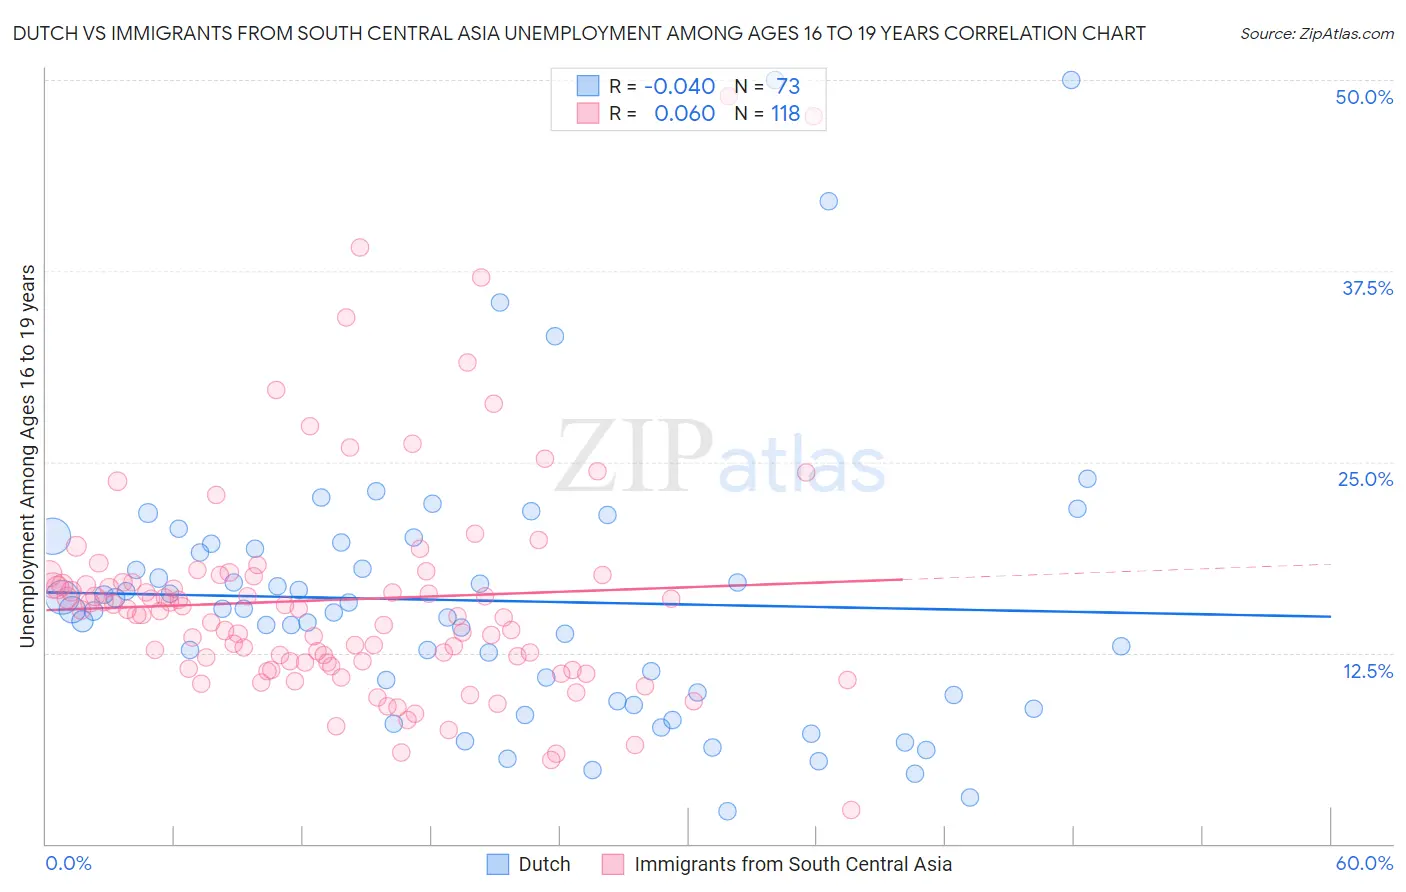 Dutch vs Immigrants from South Central Asia Unemployment Among Ages 16 to 19 years